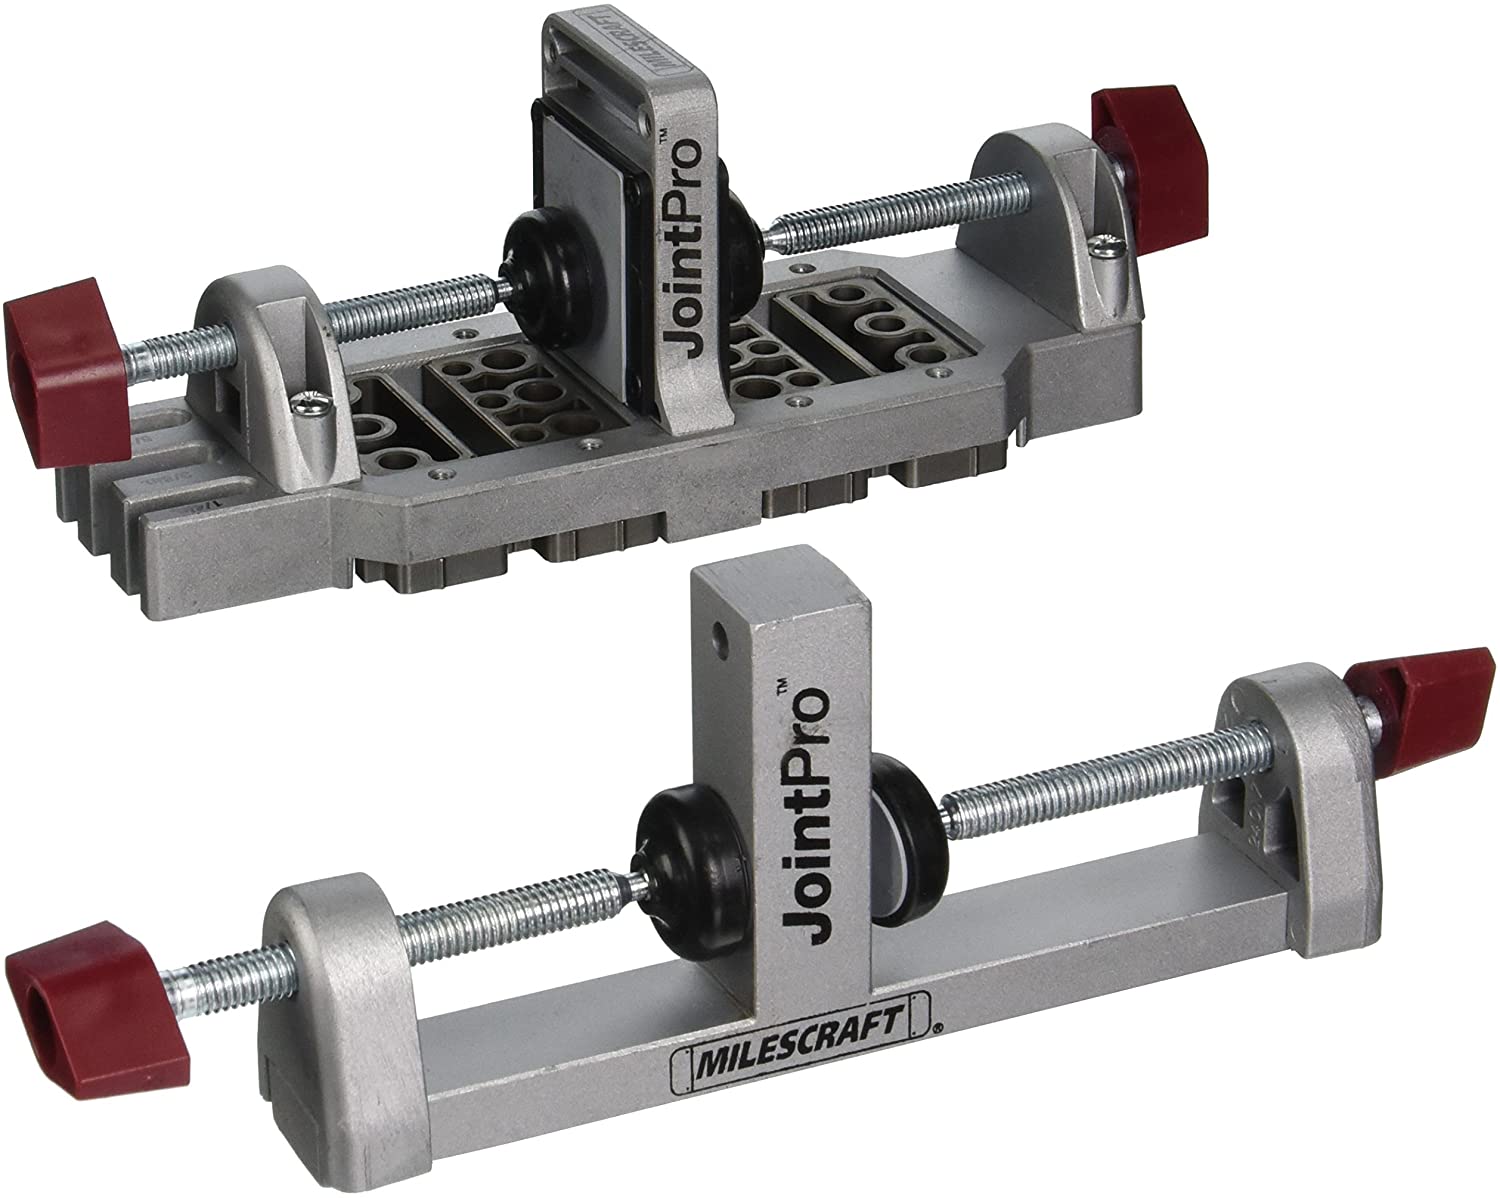 Milescraft Joint Pro Doweling Jig 1361 Power Tool Services